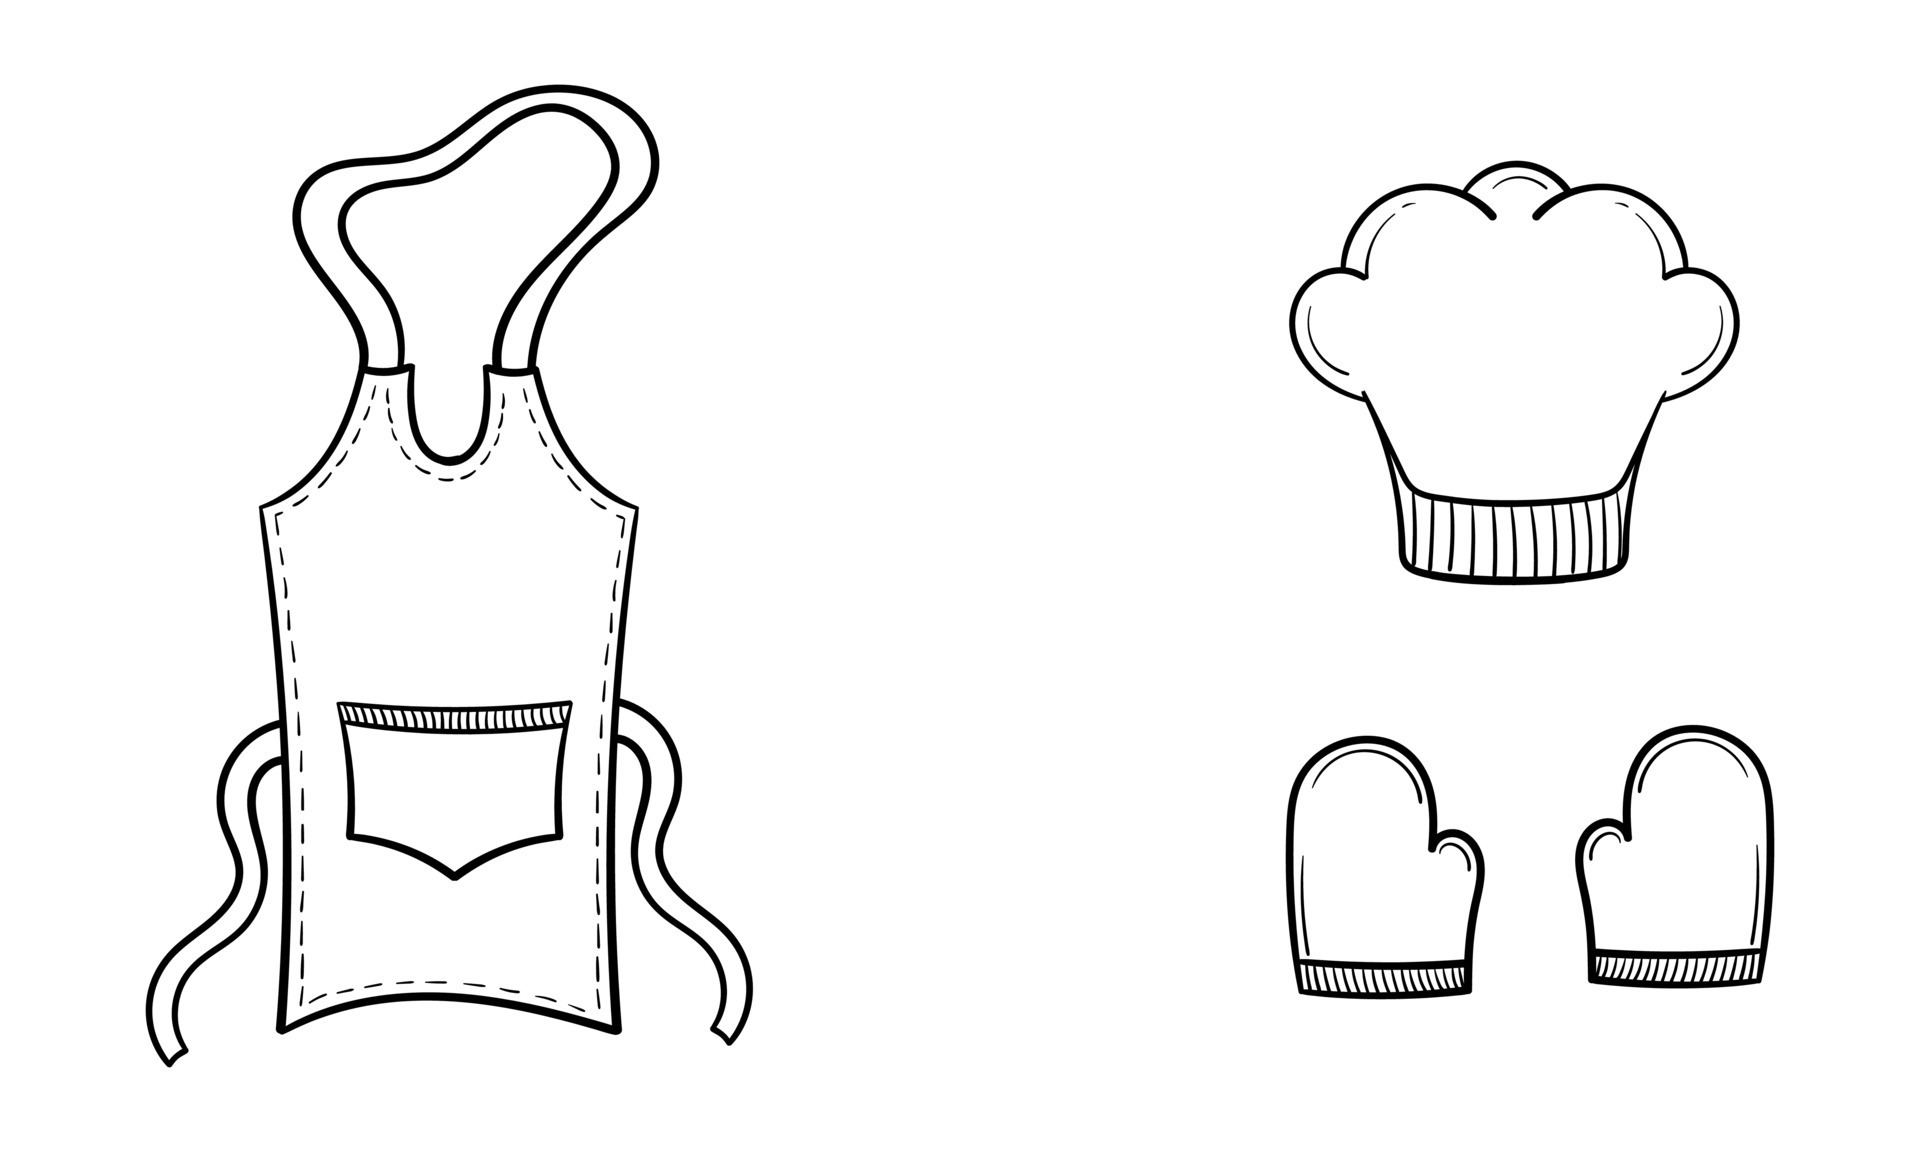 https://static.vecteezy.com/system/resources/previews/016/546/913/original/hand-drawn-apron-chef-hat-and-cooking-gloves-vector.jpg